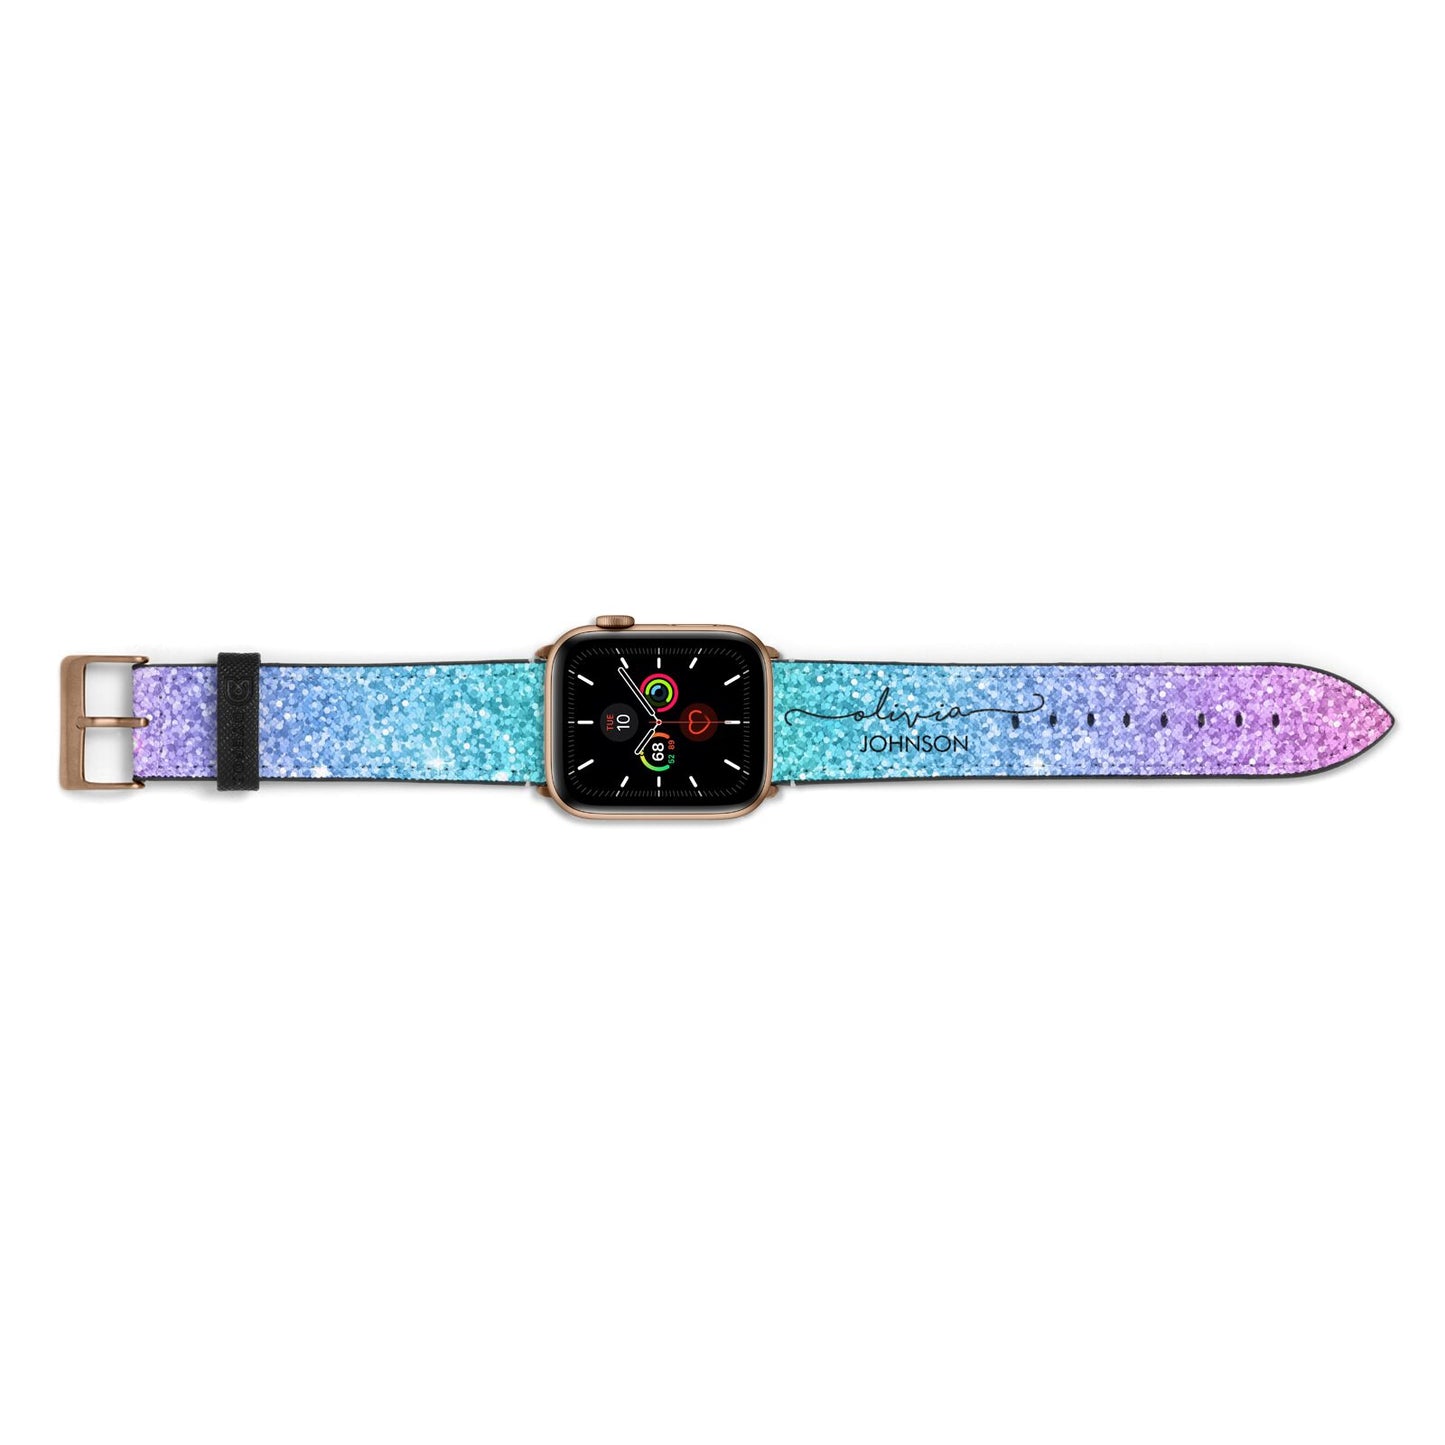 Personalised Ombre Glitter with Names Apple Watch Strap Landscape Image Gold Hardware